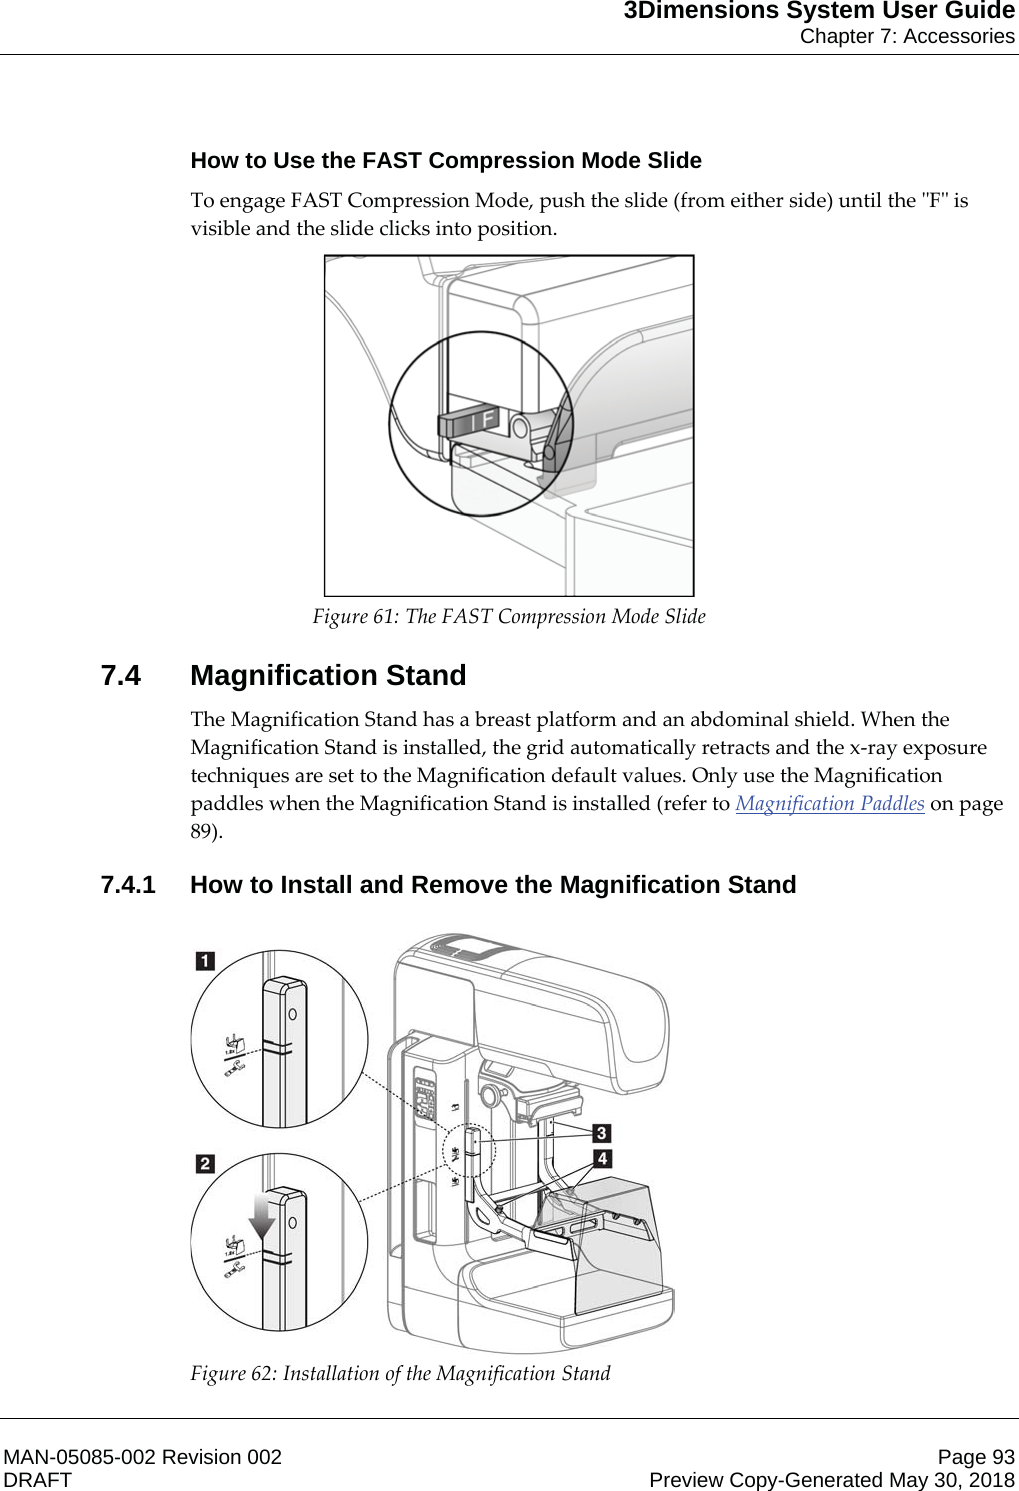 3Dimensions System User GuideChapter 7: AccessoriesMAN-05085-002 Revision 002 Page 93DRAFT Preview Copy-Generated May 30, 2018How to Use the FAST Compression Mode SlideTo engage FAST Compression Mode, push the slide (from either side) until the &quot;F&quot; is visible and the slide clicks into position.  Figure 61: The FAST Compression Mode Slide 7.4 Magnification StandThe Magnification Stand has a breast platform and an abdominal shield. When the Magnification Stand is installed, the grid automatically retracts and the x-ray exposure techniques are set to the Magnification default values. Only use the Magnification paddles when the Magnification Stand is installed (refer to Magnification Paddles on page 89). 7.4.1 How to Install and Remove the Magnification Stand  Figure 62: Installation of the Magnification Stand    